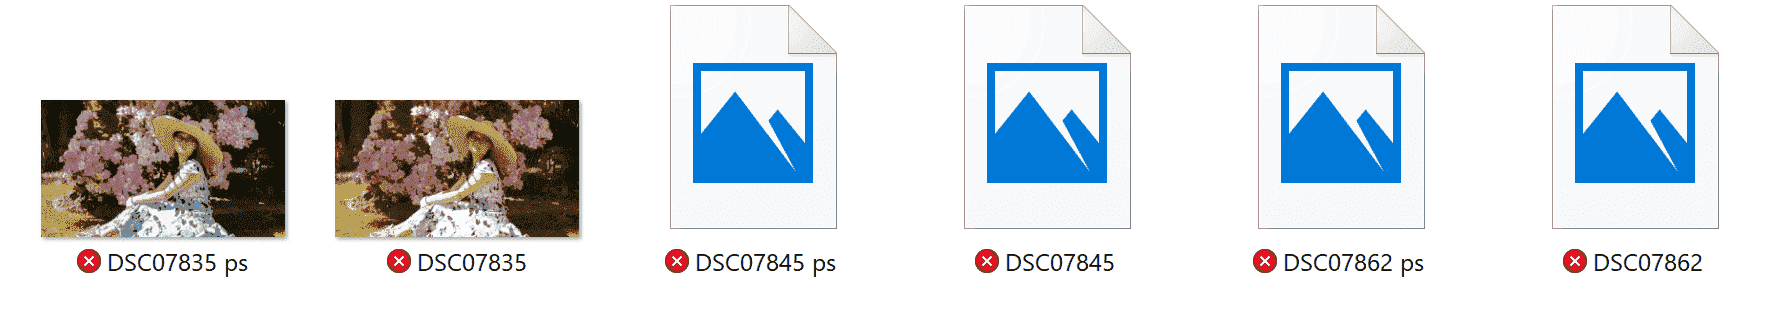 Windows 10 explorer photo thumbnails only show some of the photos cceebc87-d168-4419-b08f-e94734bc10c8?upload=true.png